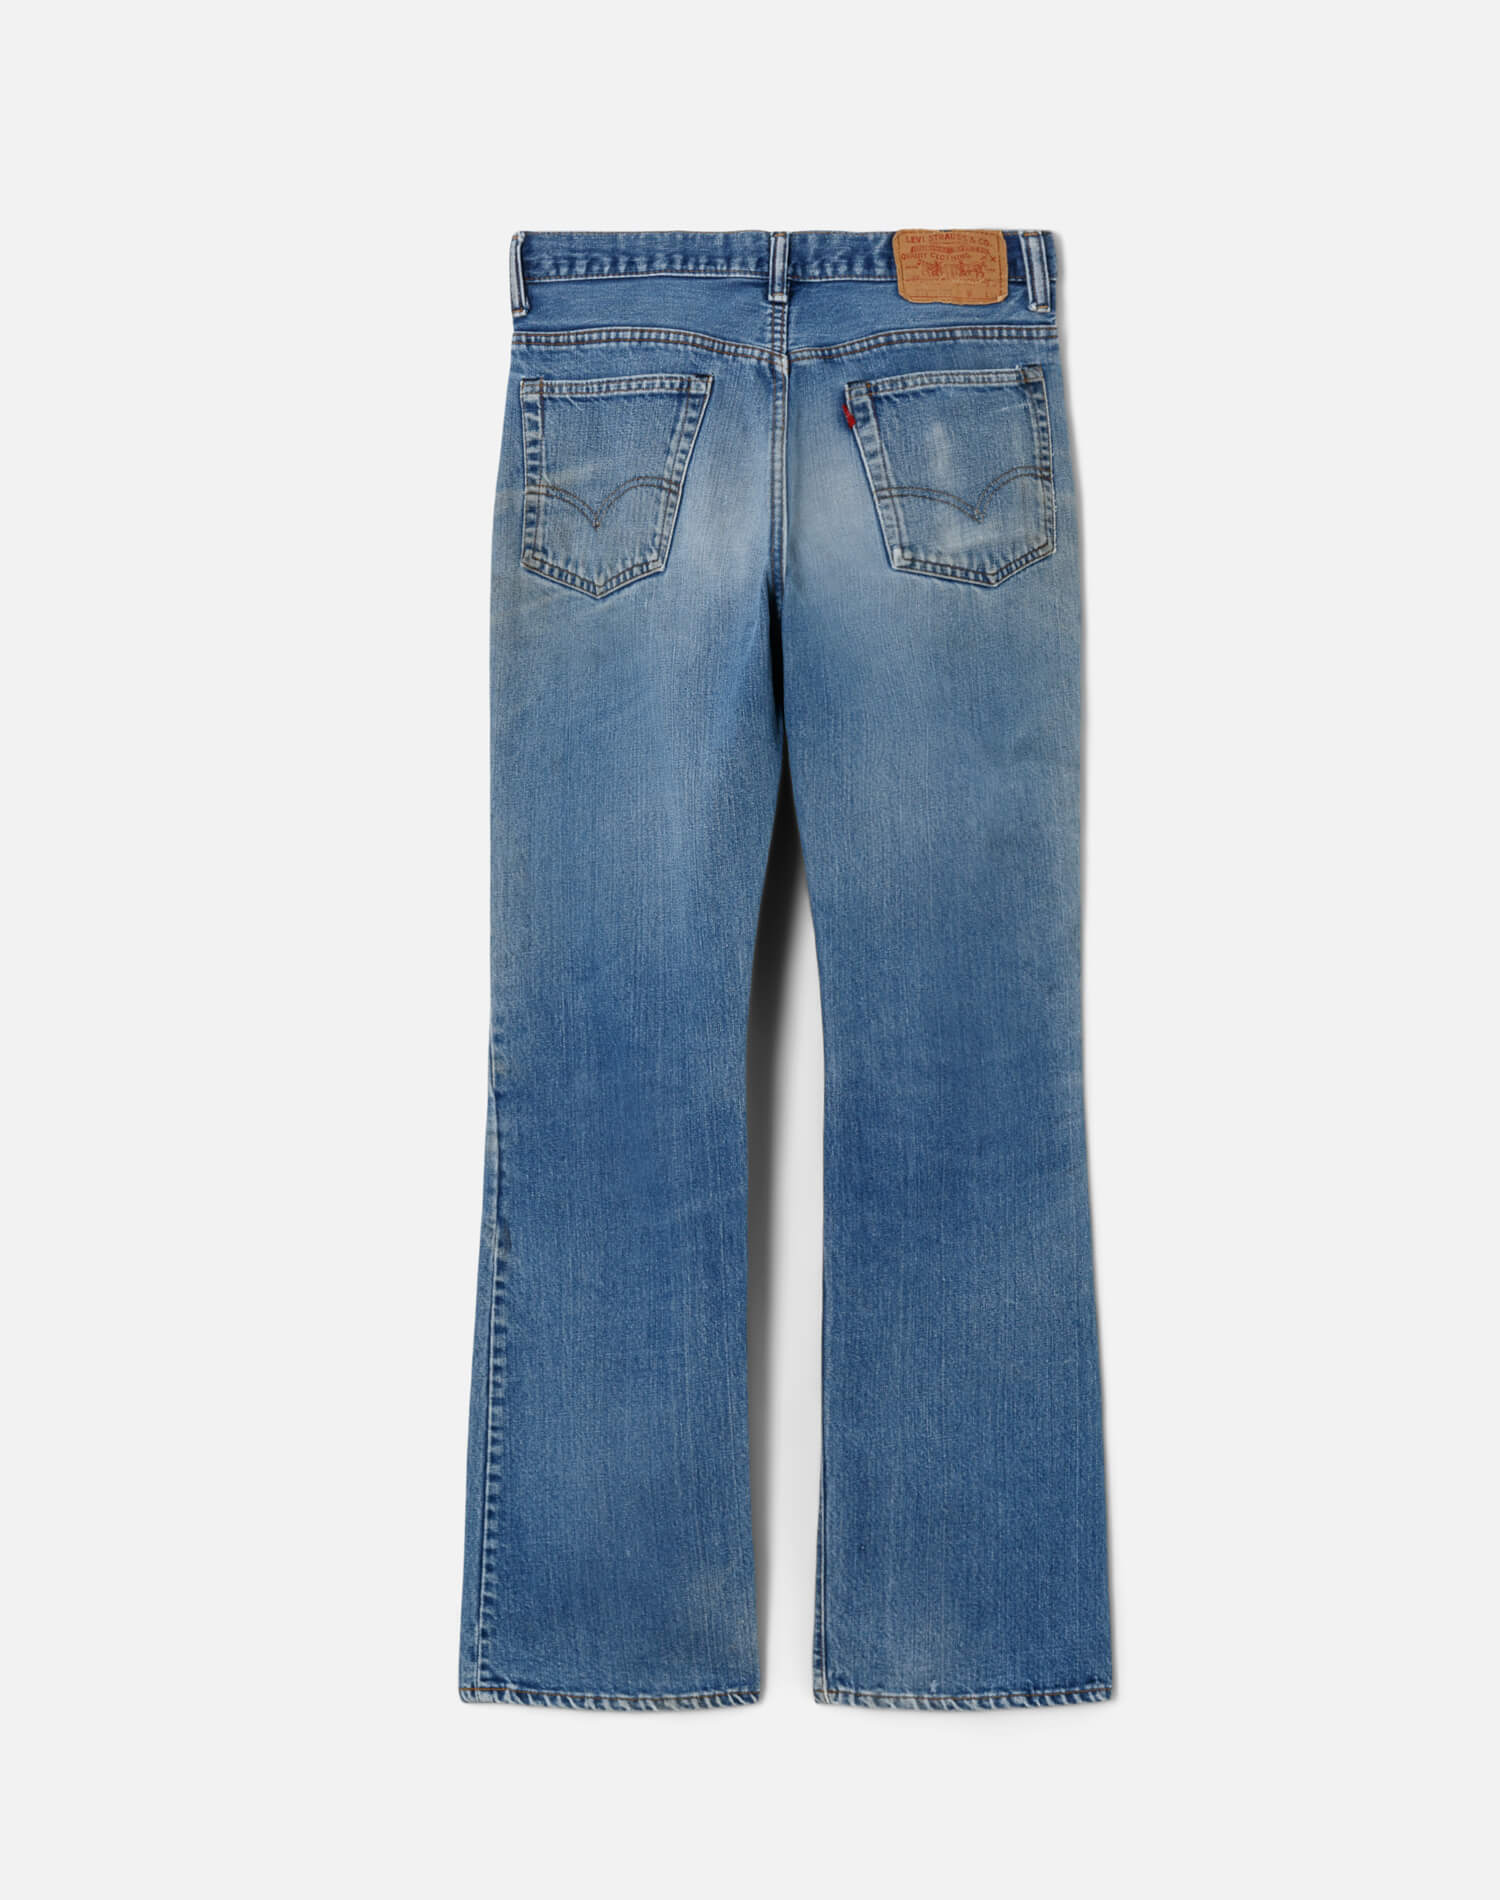 70s Destroyed Levi's 517 - #39